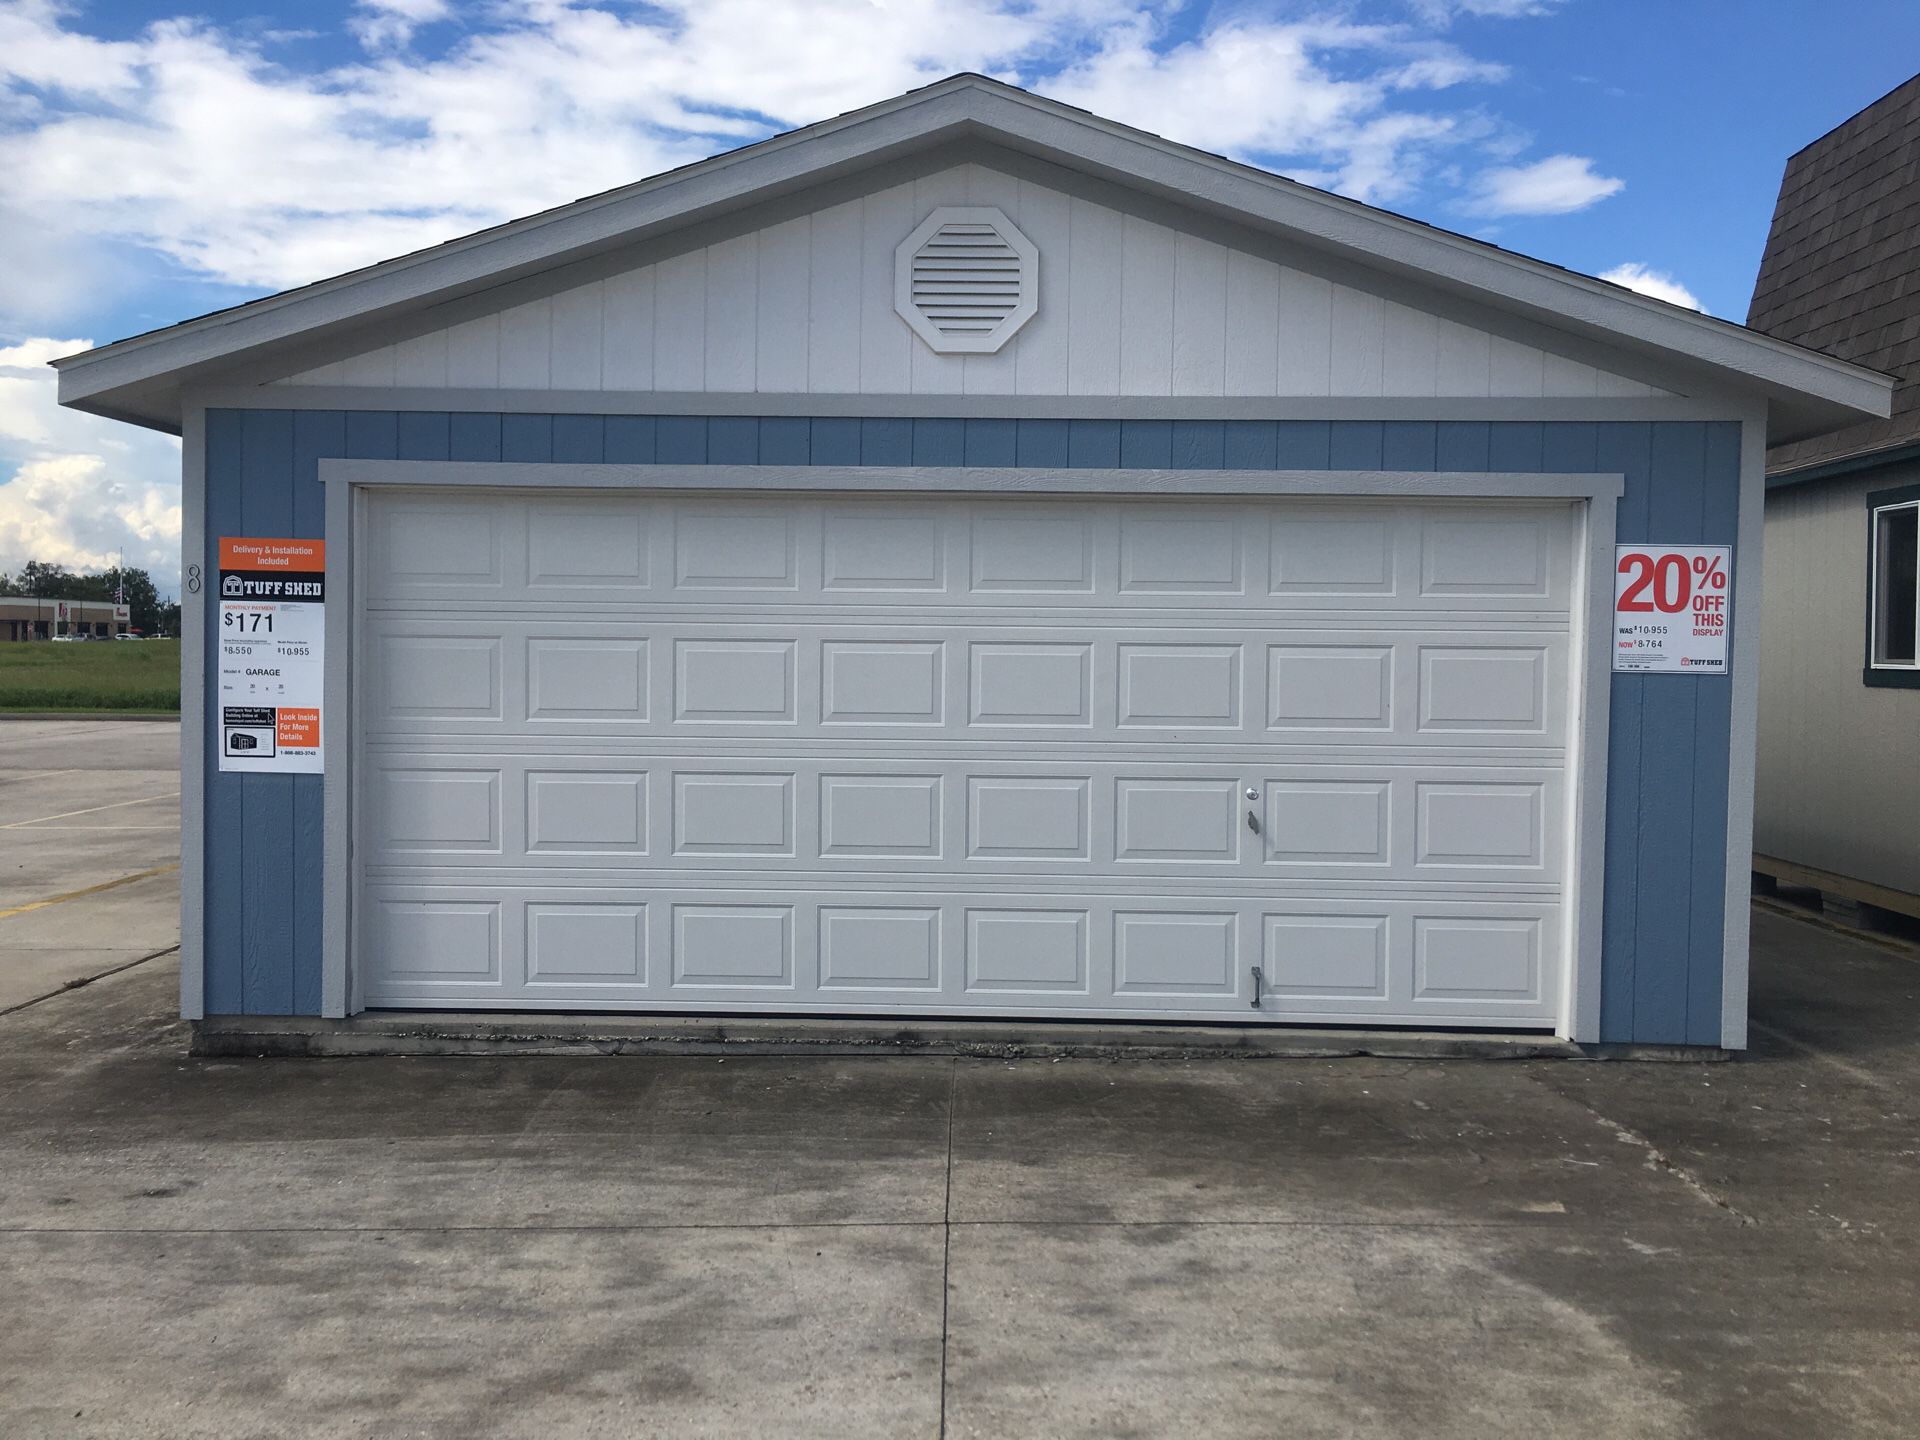 Tuff Shed Garage 20 X 20 At Home Depot Gonzales For Sale In Gonzales